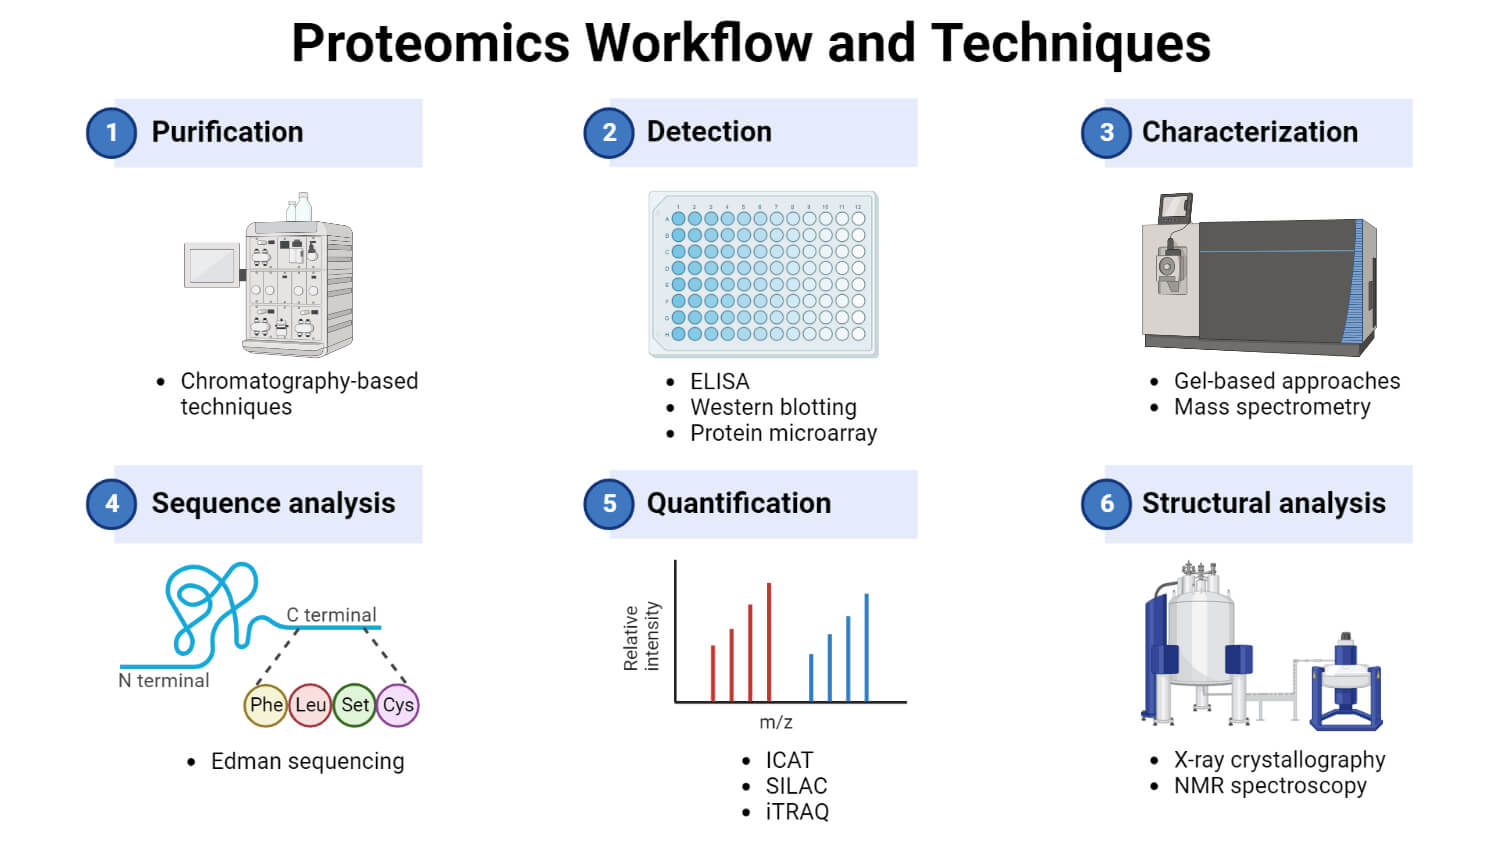 Proteomics Workflow and Techniques